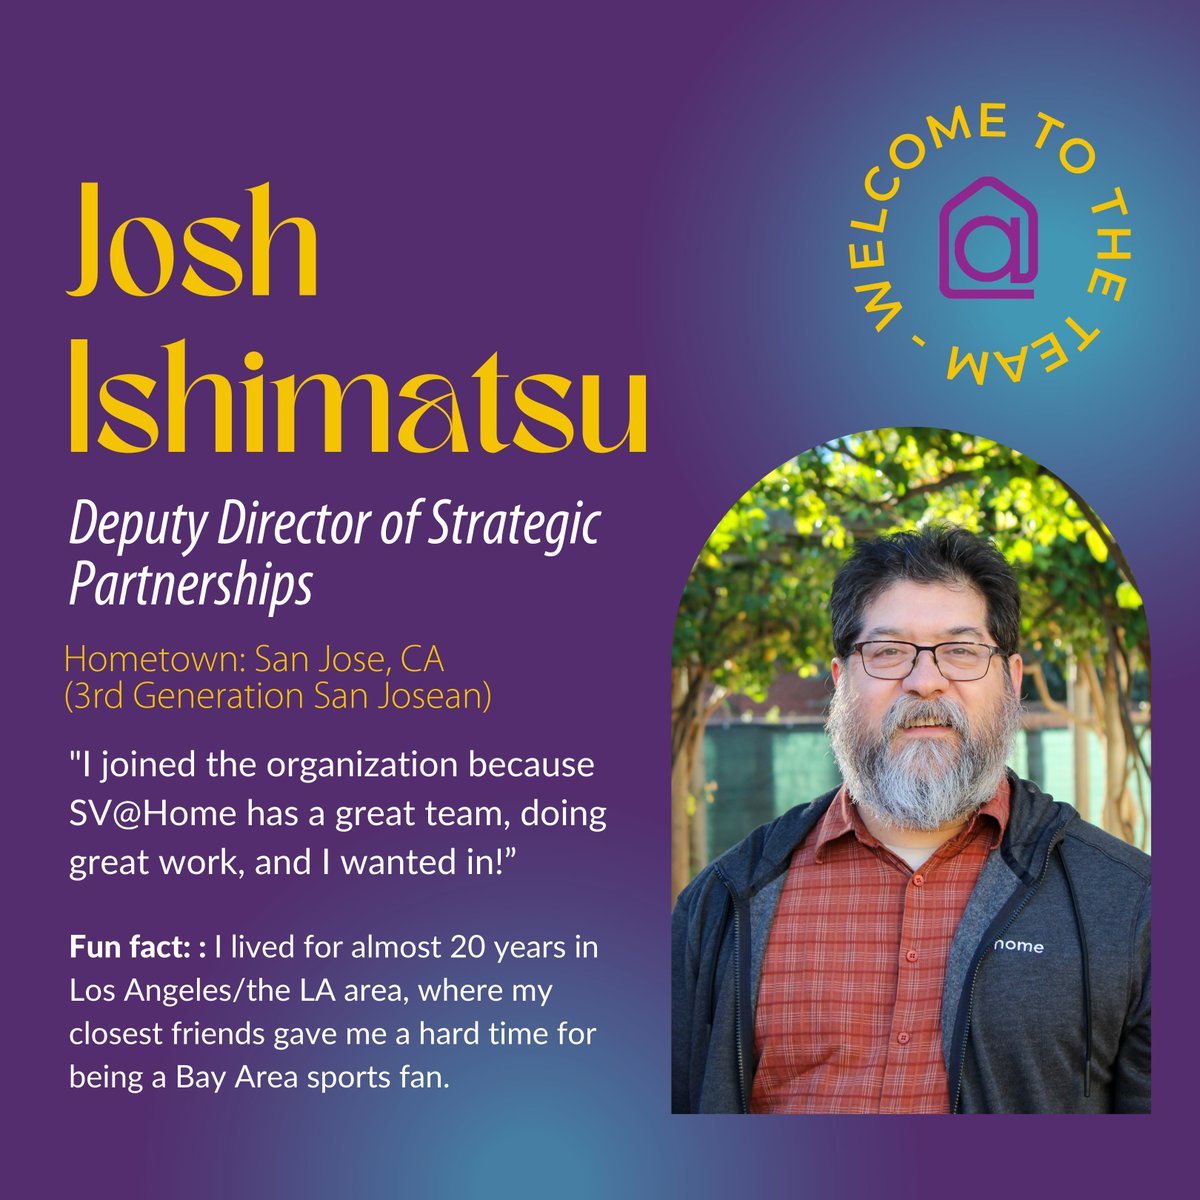 Join us in welcoming our new Deputy Director of Strategic Partnerships, Josh Ishimatsu! 🎉 We are so thrilled to have his passion and expertise on our team and are excited to see the positive impact he will have on our policy and advocacy work in Santa Clara County. #svathome